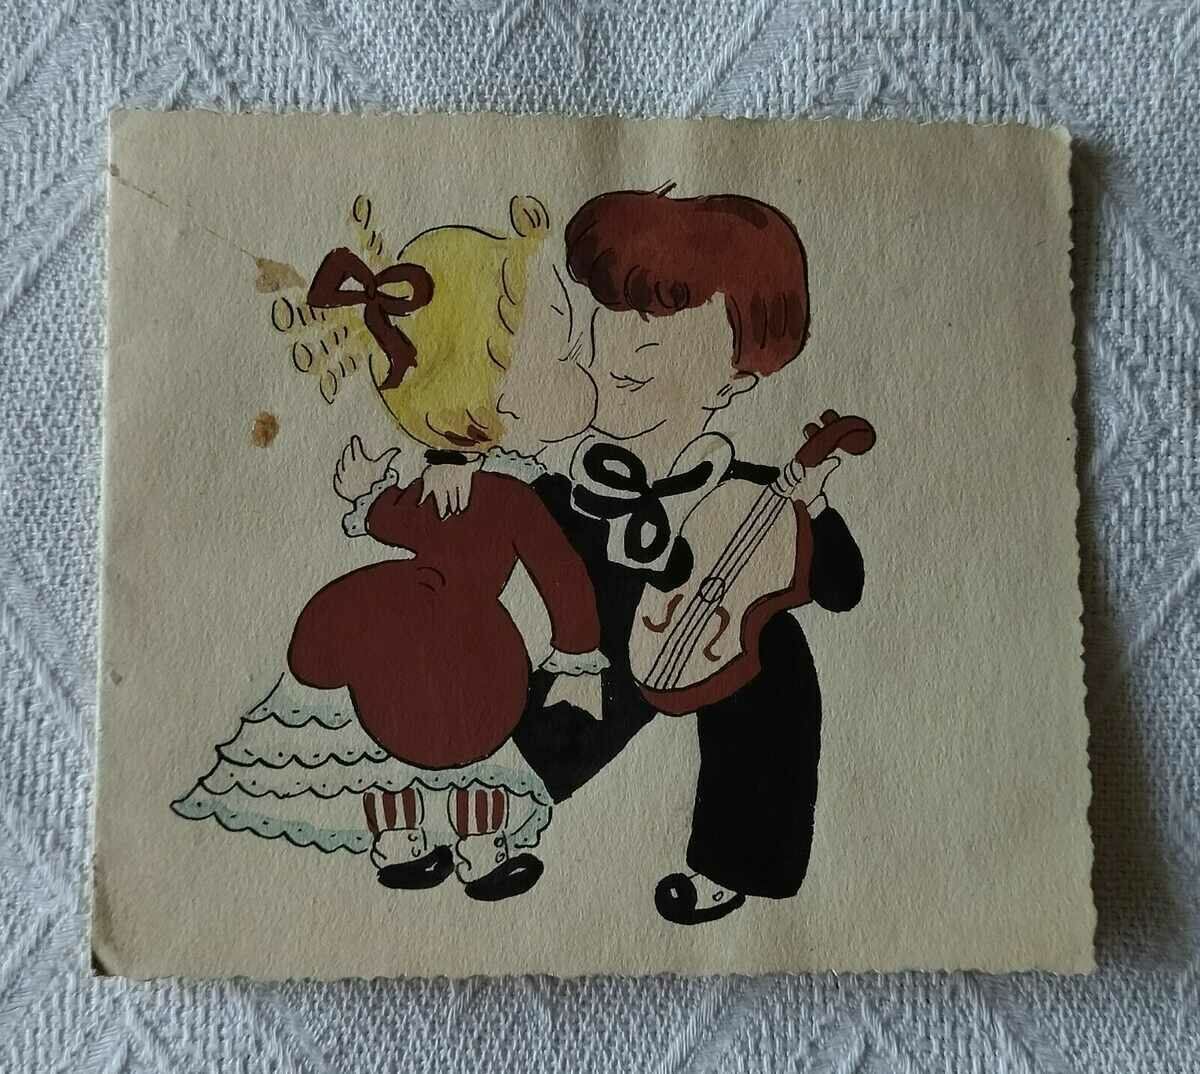 HAND PAINTED 1953 BOILER ROOM CARD.